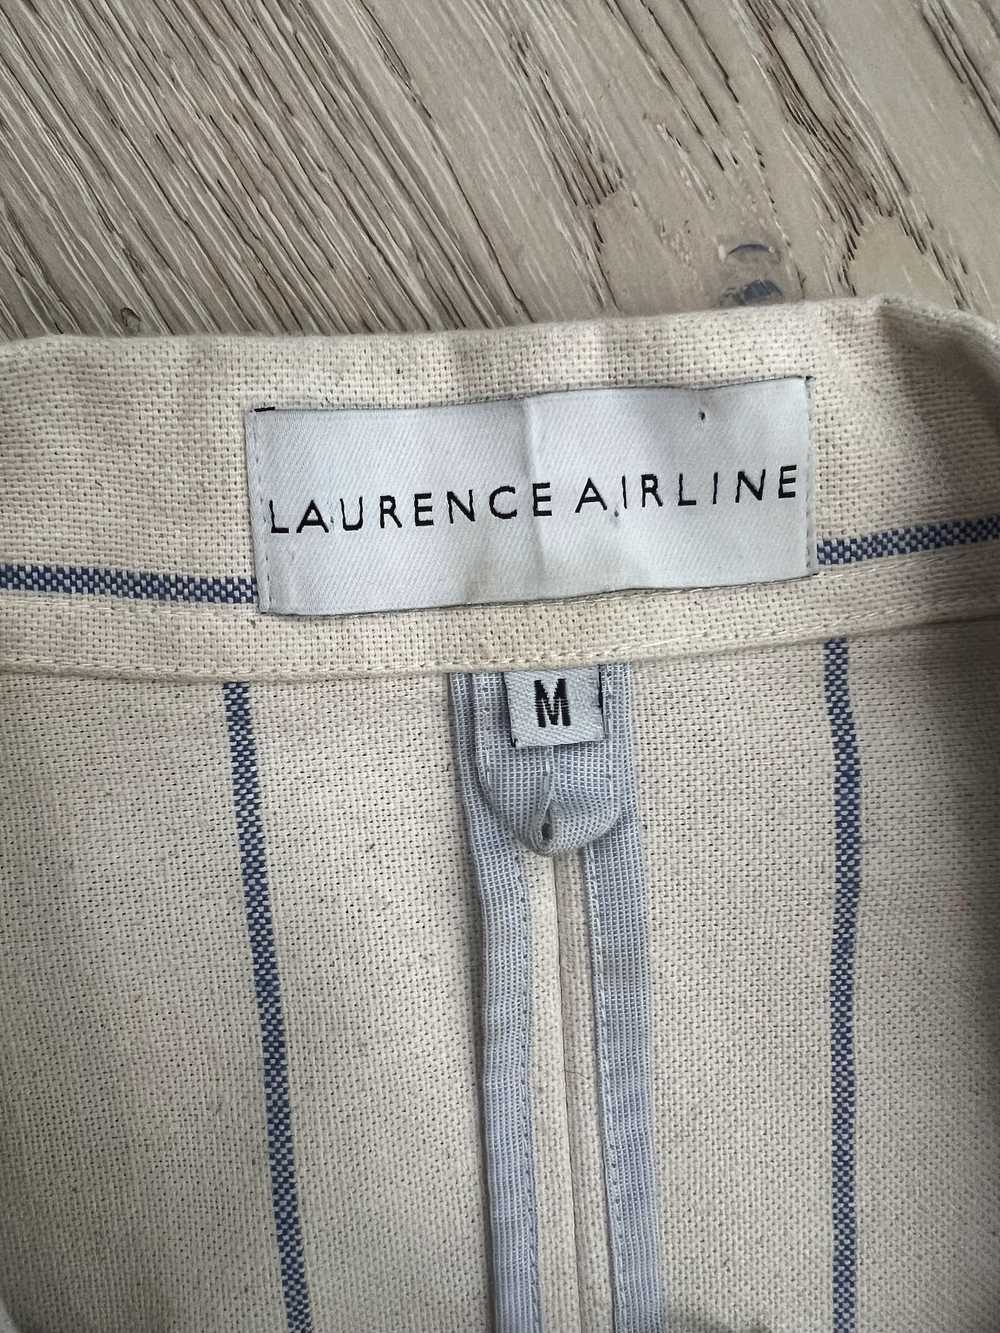 LAURENCE AIRLINE LAURENCE AIRLINE SEASAND - BEIGE… - image 2